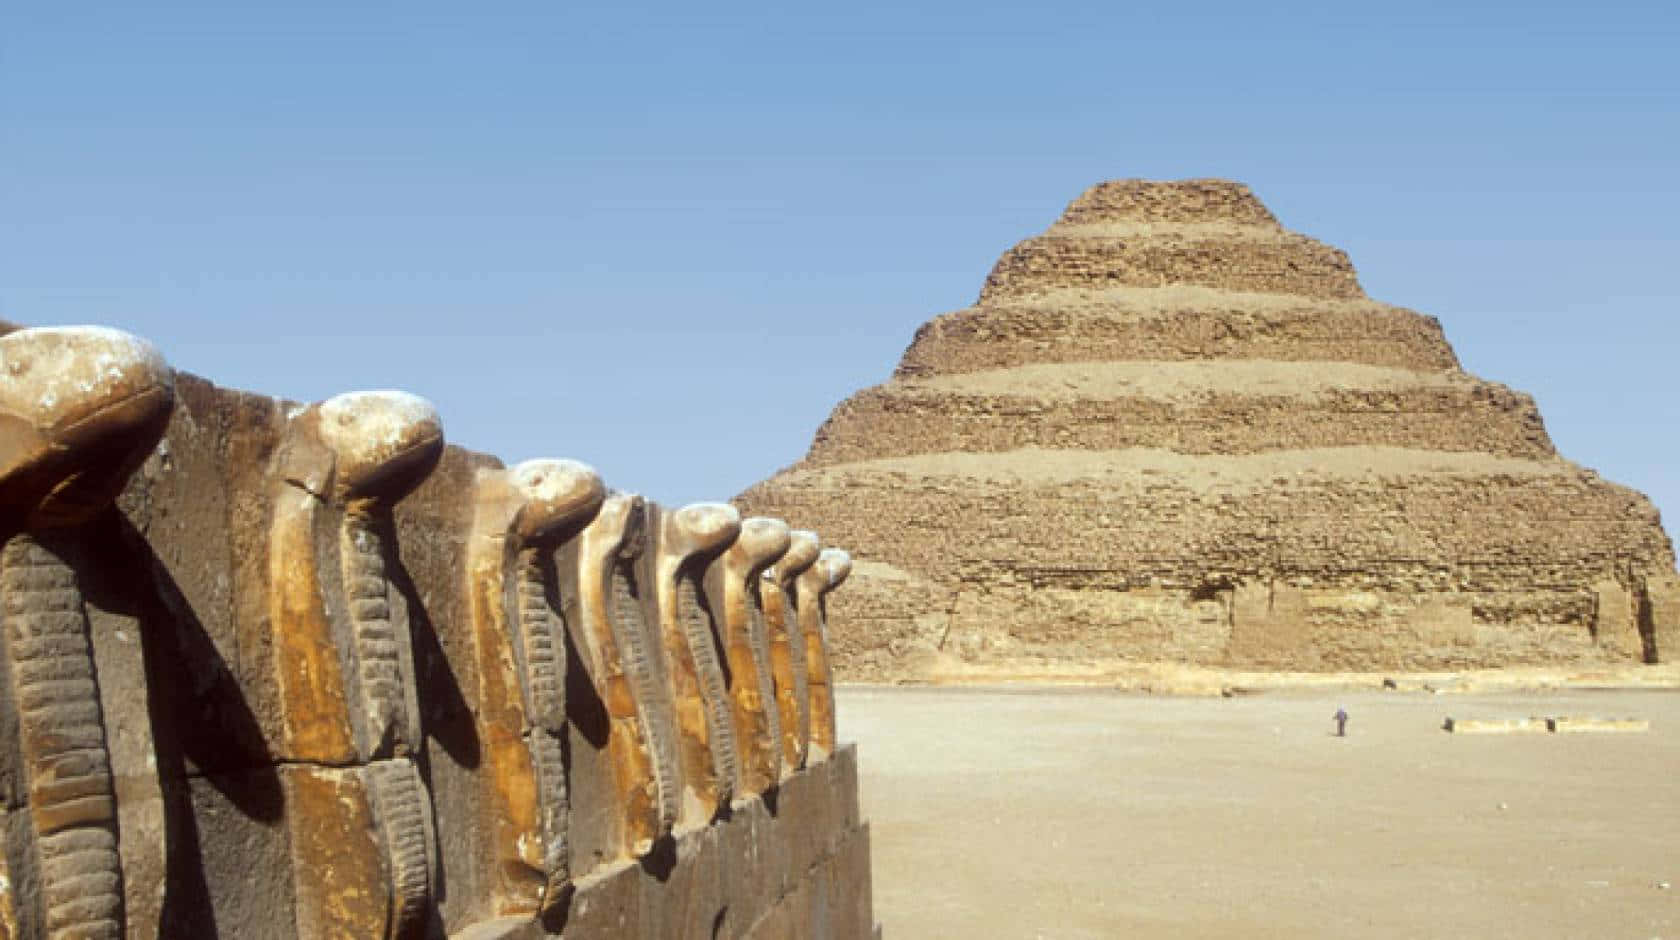 The Great Sphinx and Pyramids of Giza in Ancient Egypt